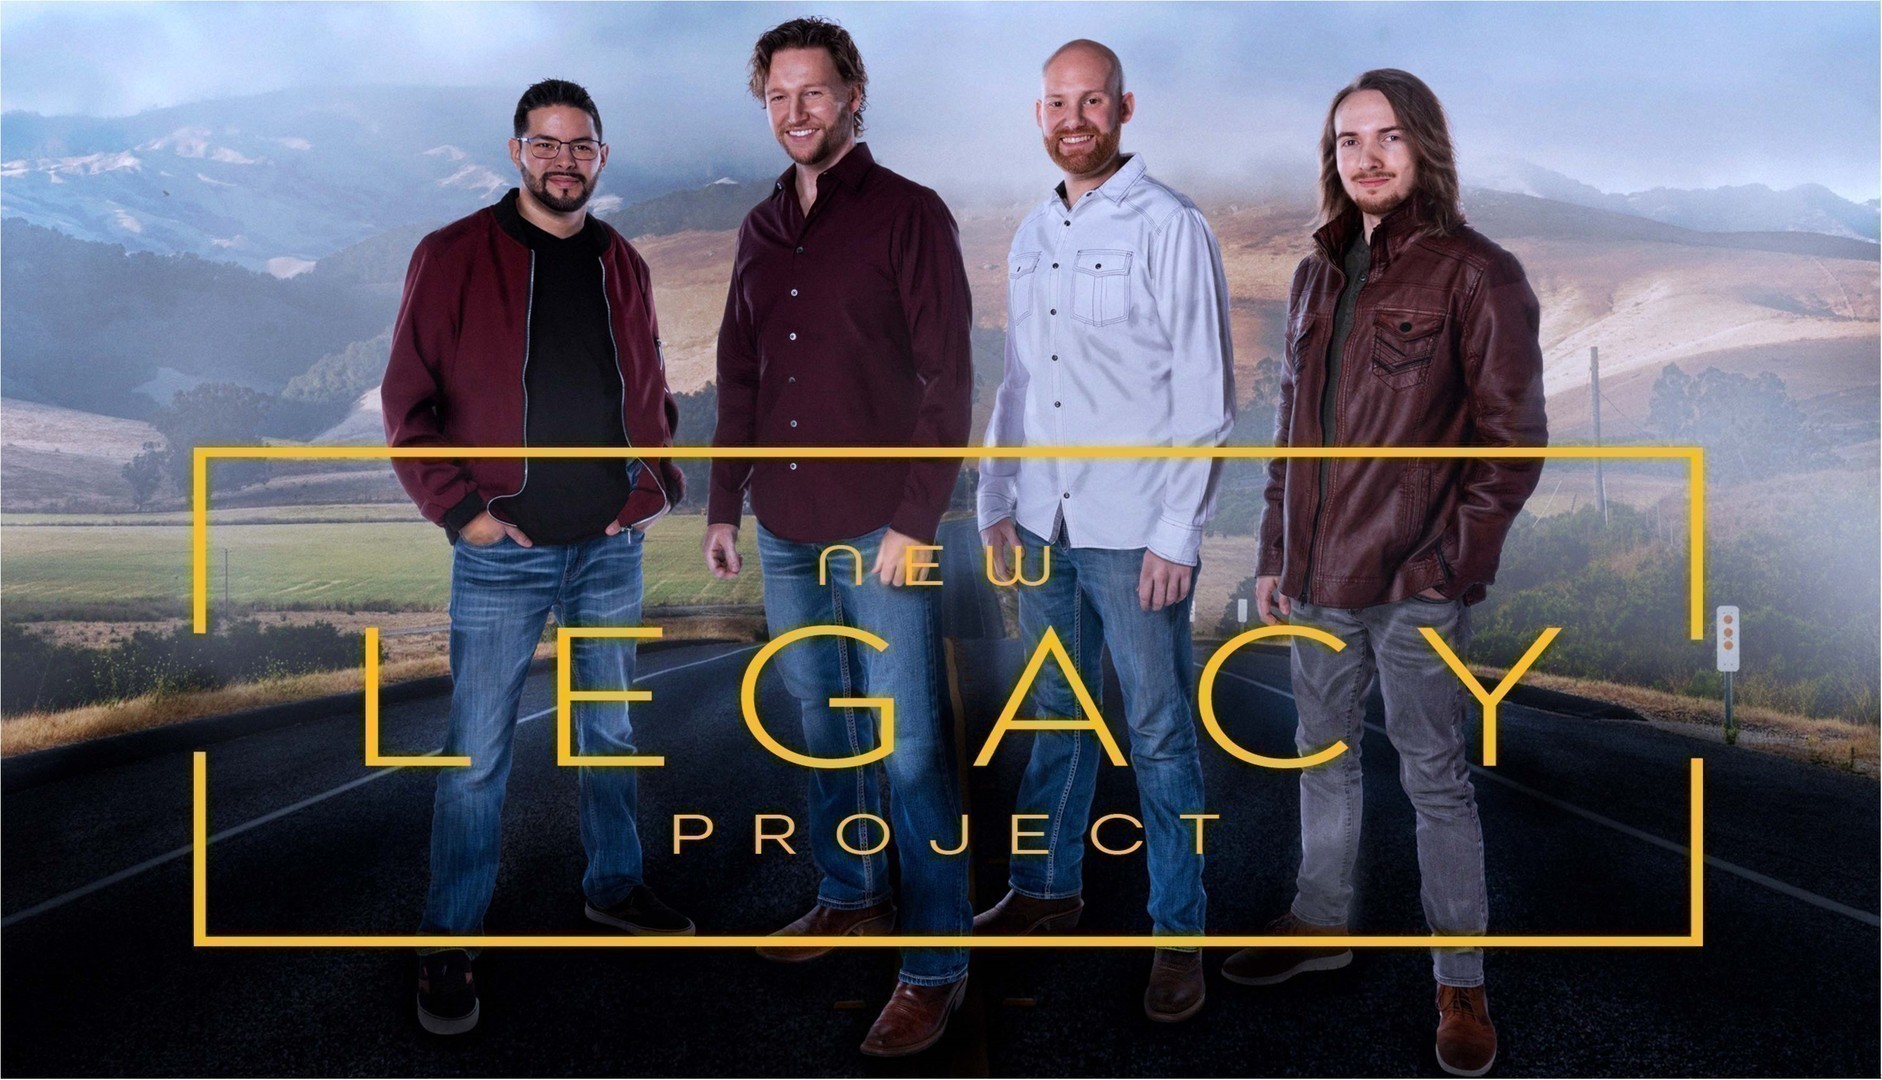 Live DEC 4 Concert in SUPERIOR with Popular Nashville-based Men's Vocal Band, NEW LEGACY PROJECT, Superior, Arizona, United States